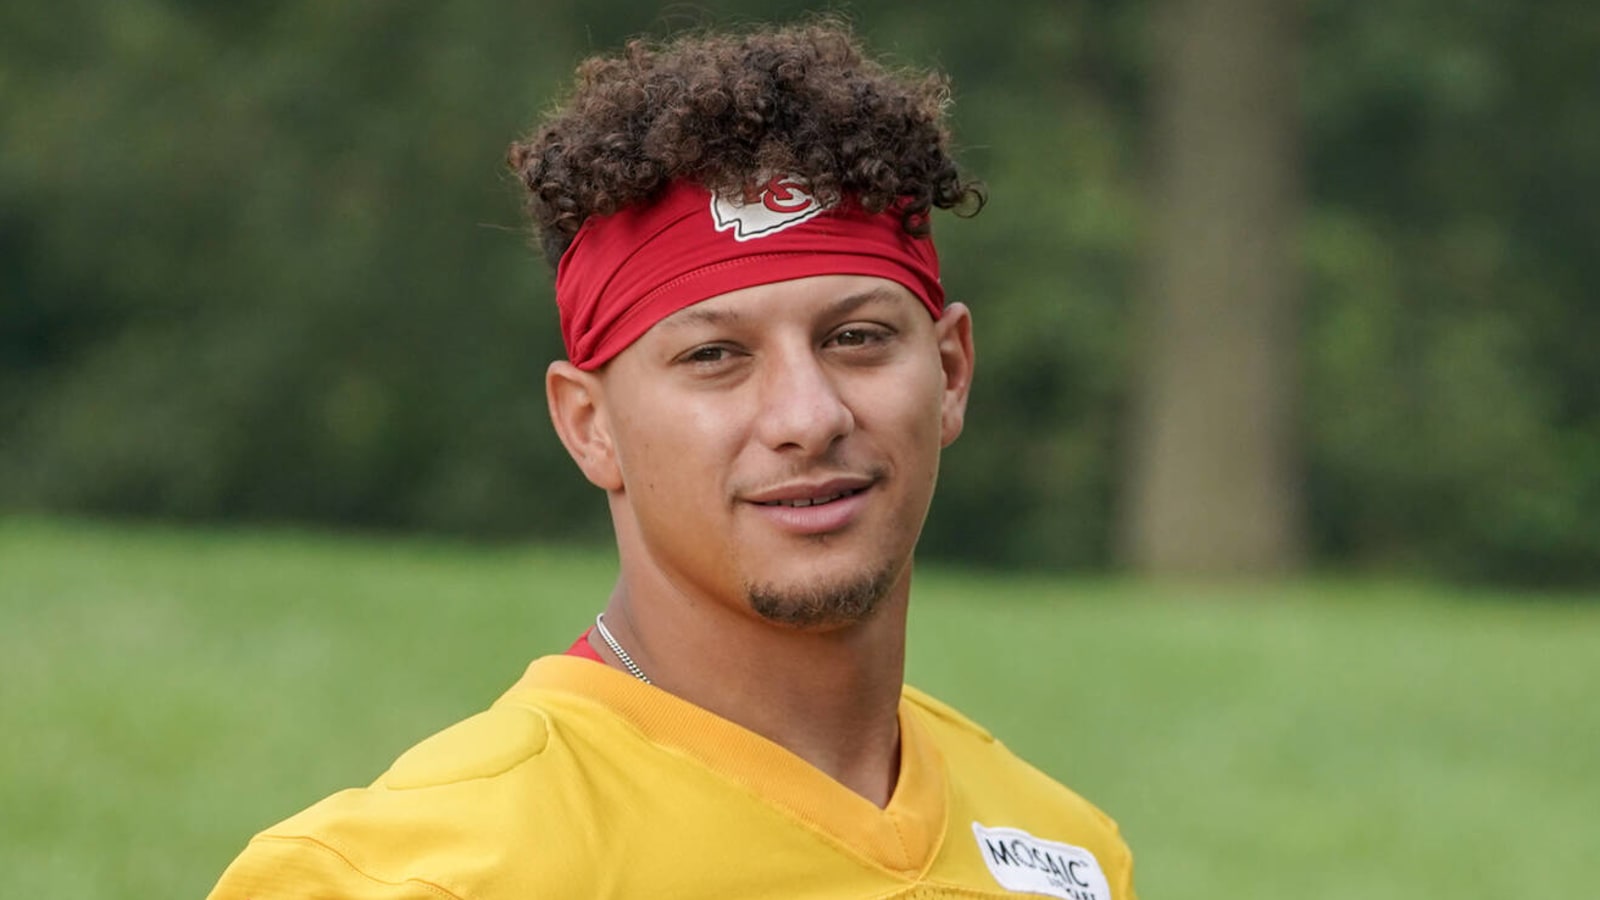 Watch: Patrick Mahomes shows off incredible accuracy at Chiefs camp